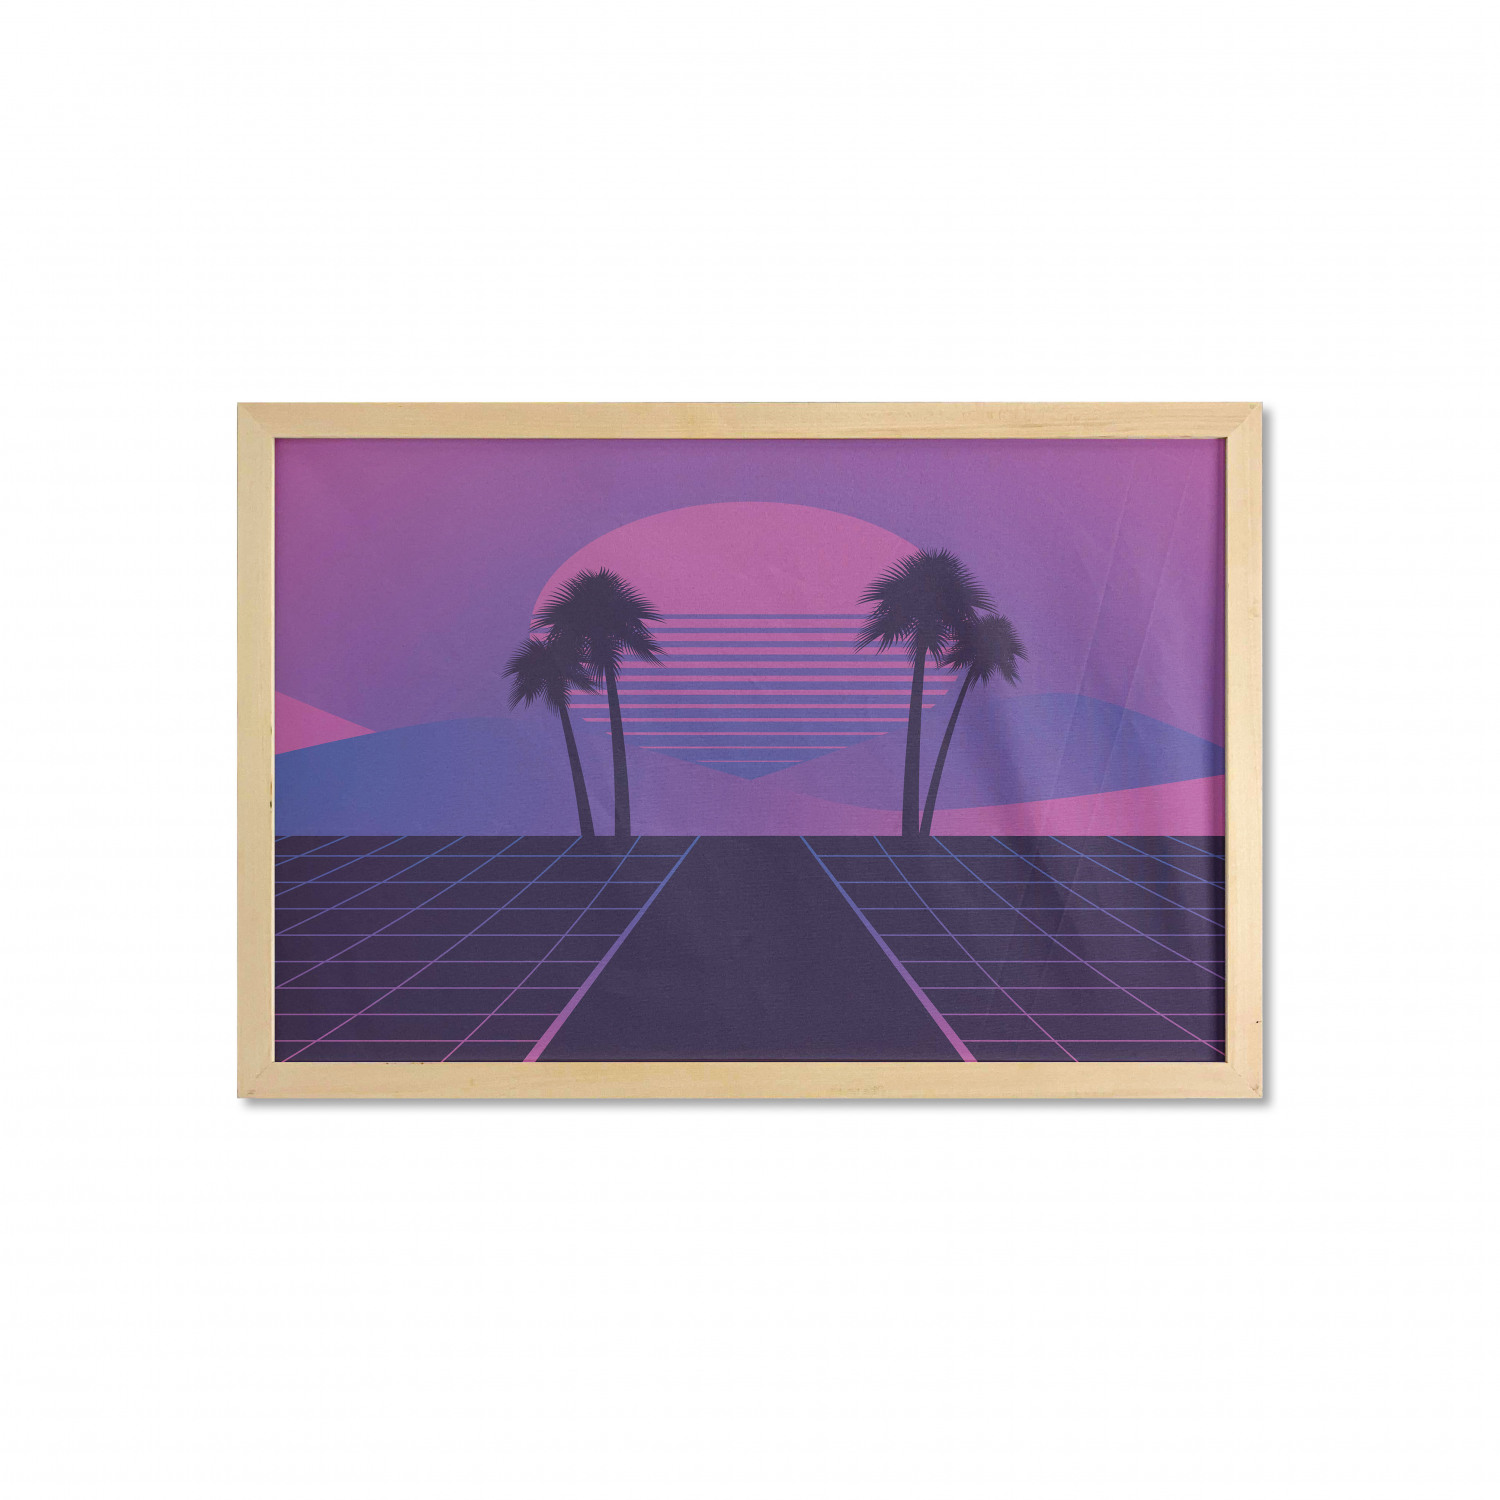 Synthwave Wall Art with Frame, Abstract 80's Dreamy Art Sunset Palm Trees  and Checks Illustration, Printed Fabric Poster for Bathroom Living Room,  35